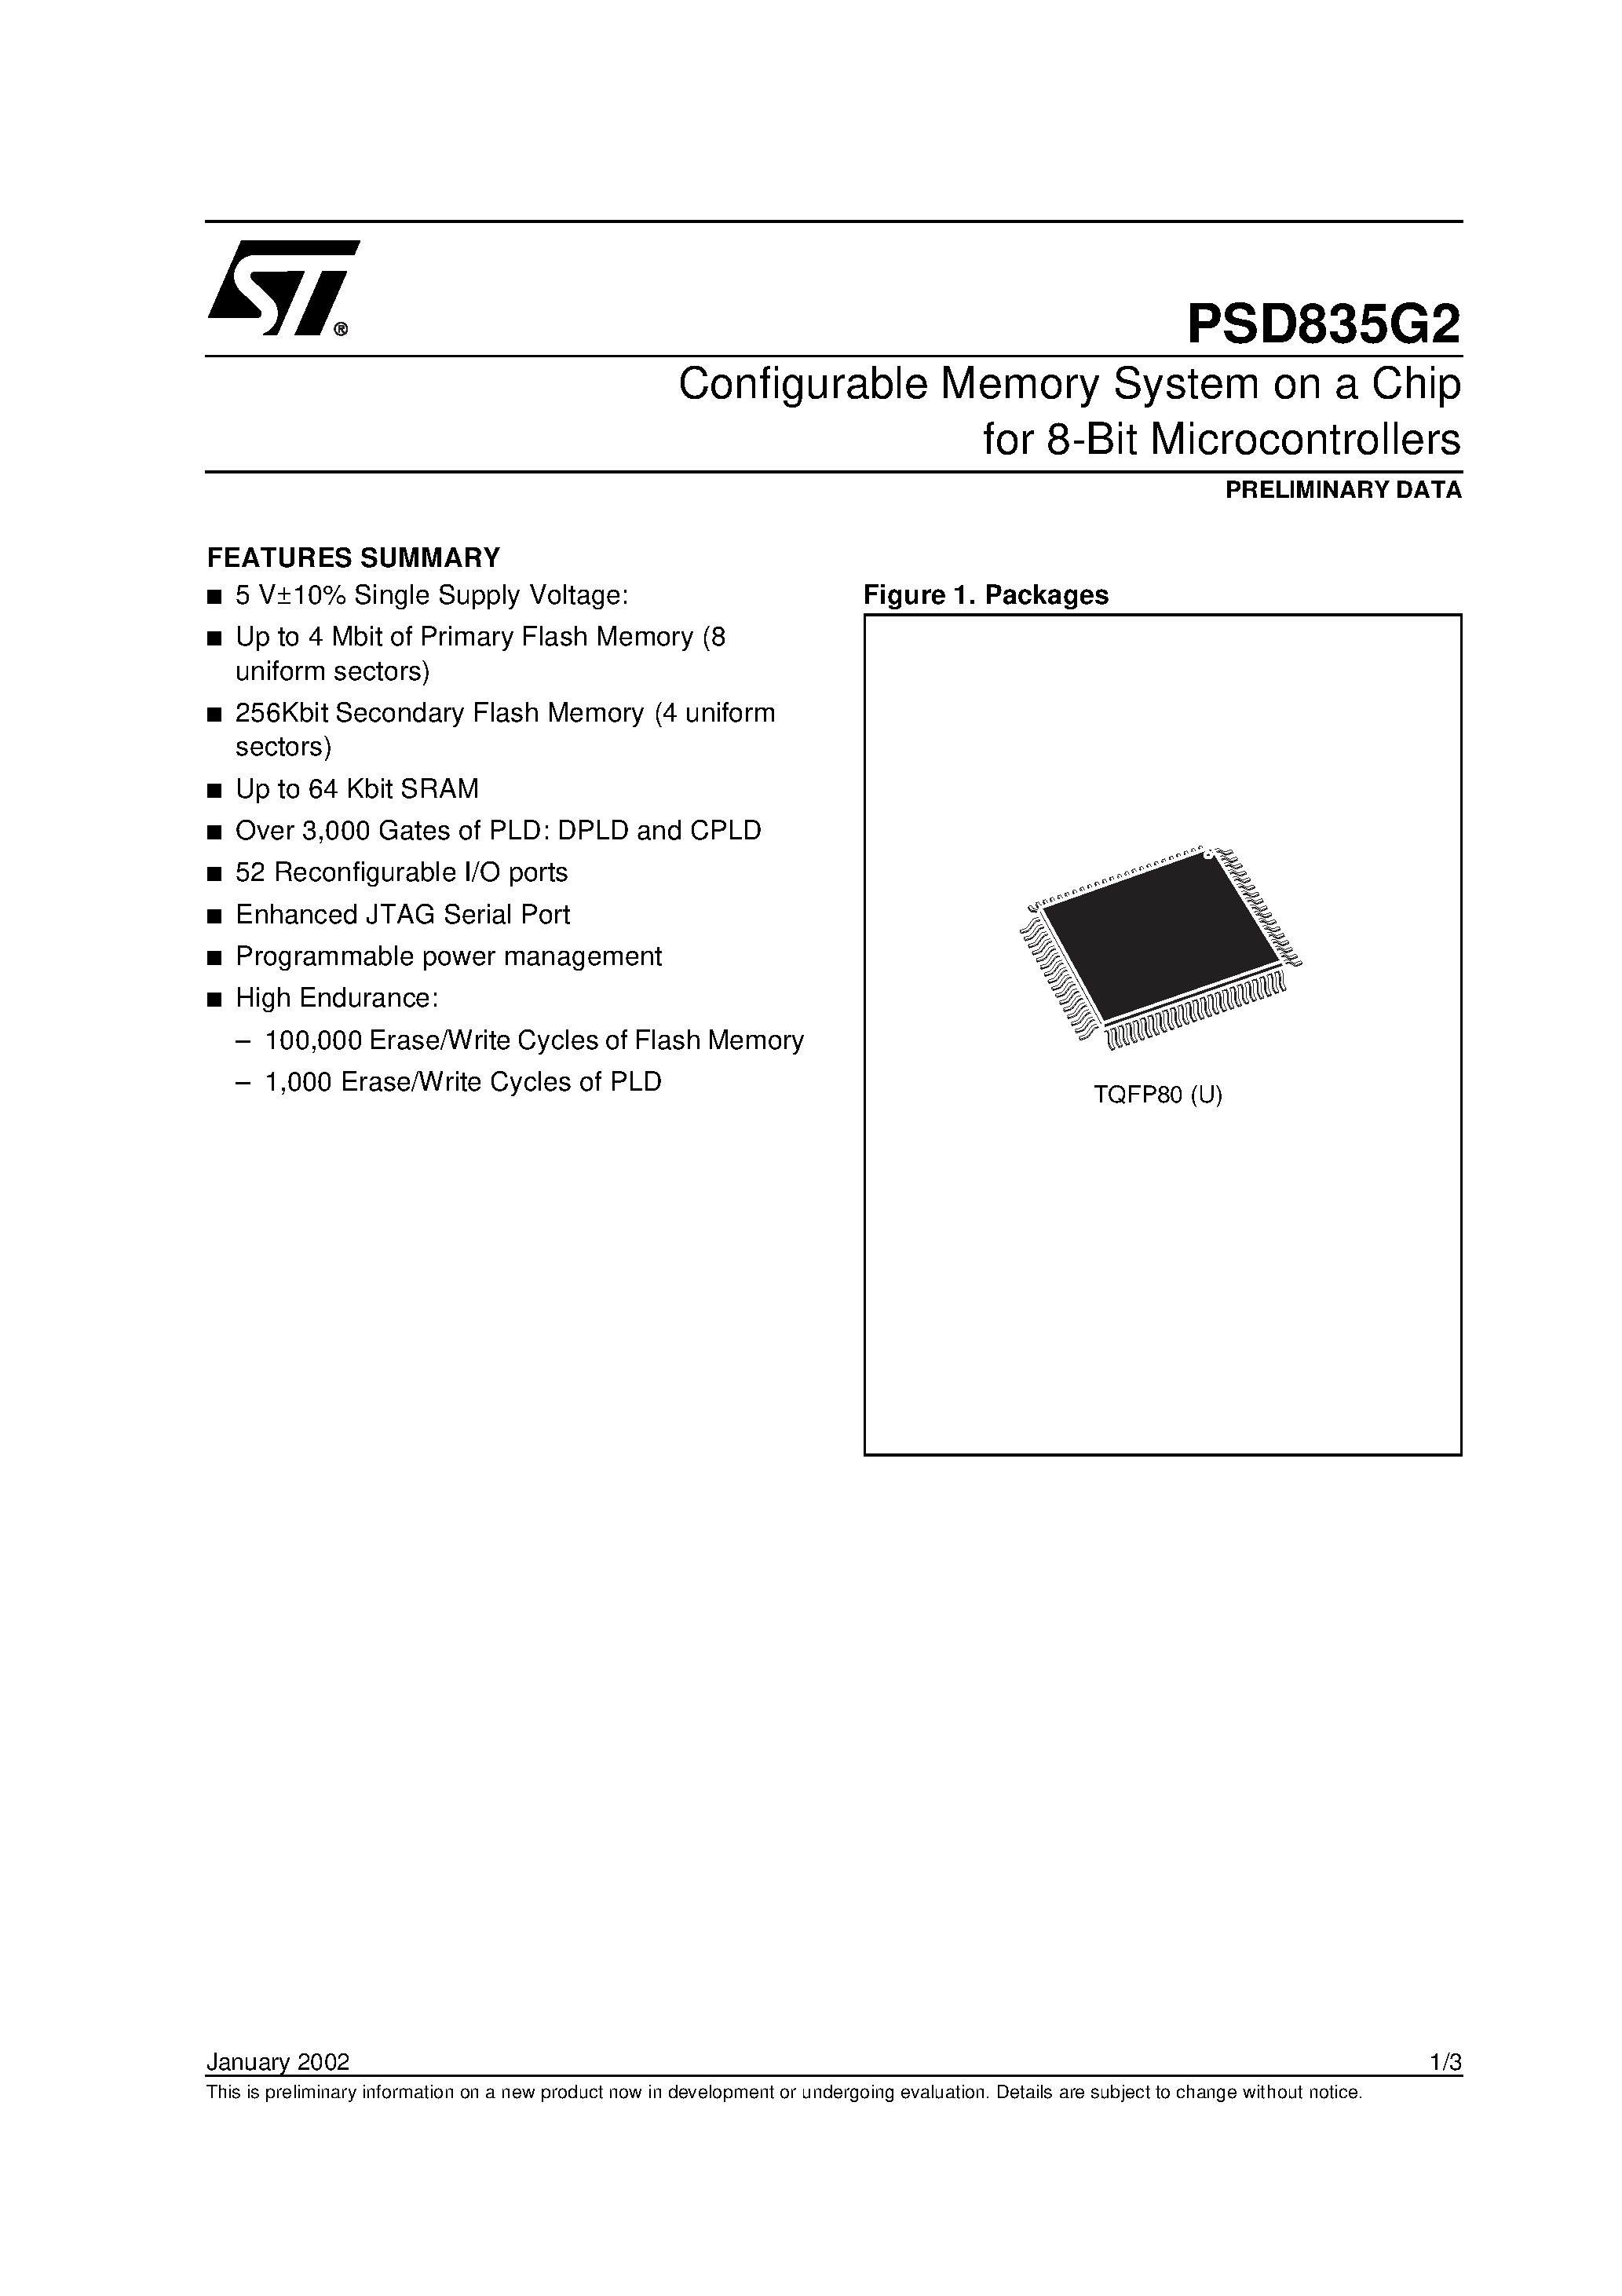 Datasheet PSD835F2V-A-15U - Configurable Memory System on a Chip for 8-Bit Microcontrollers page 1